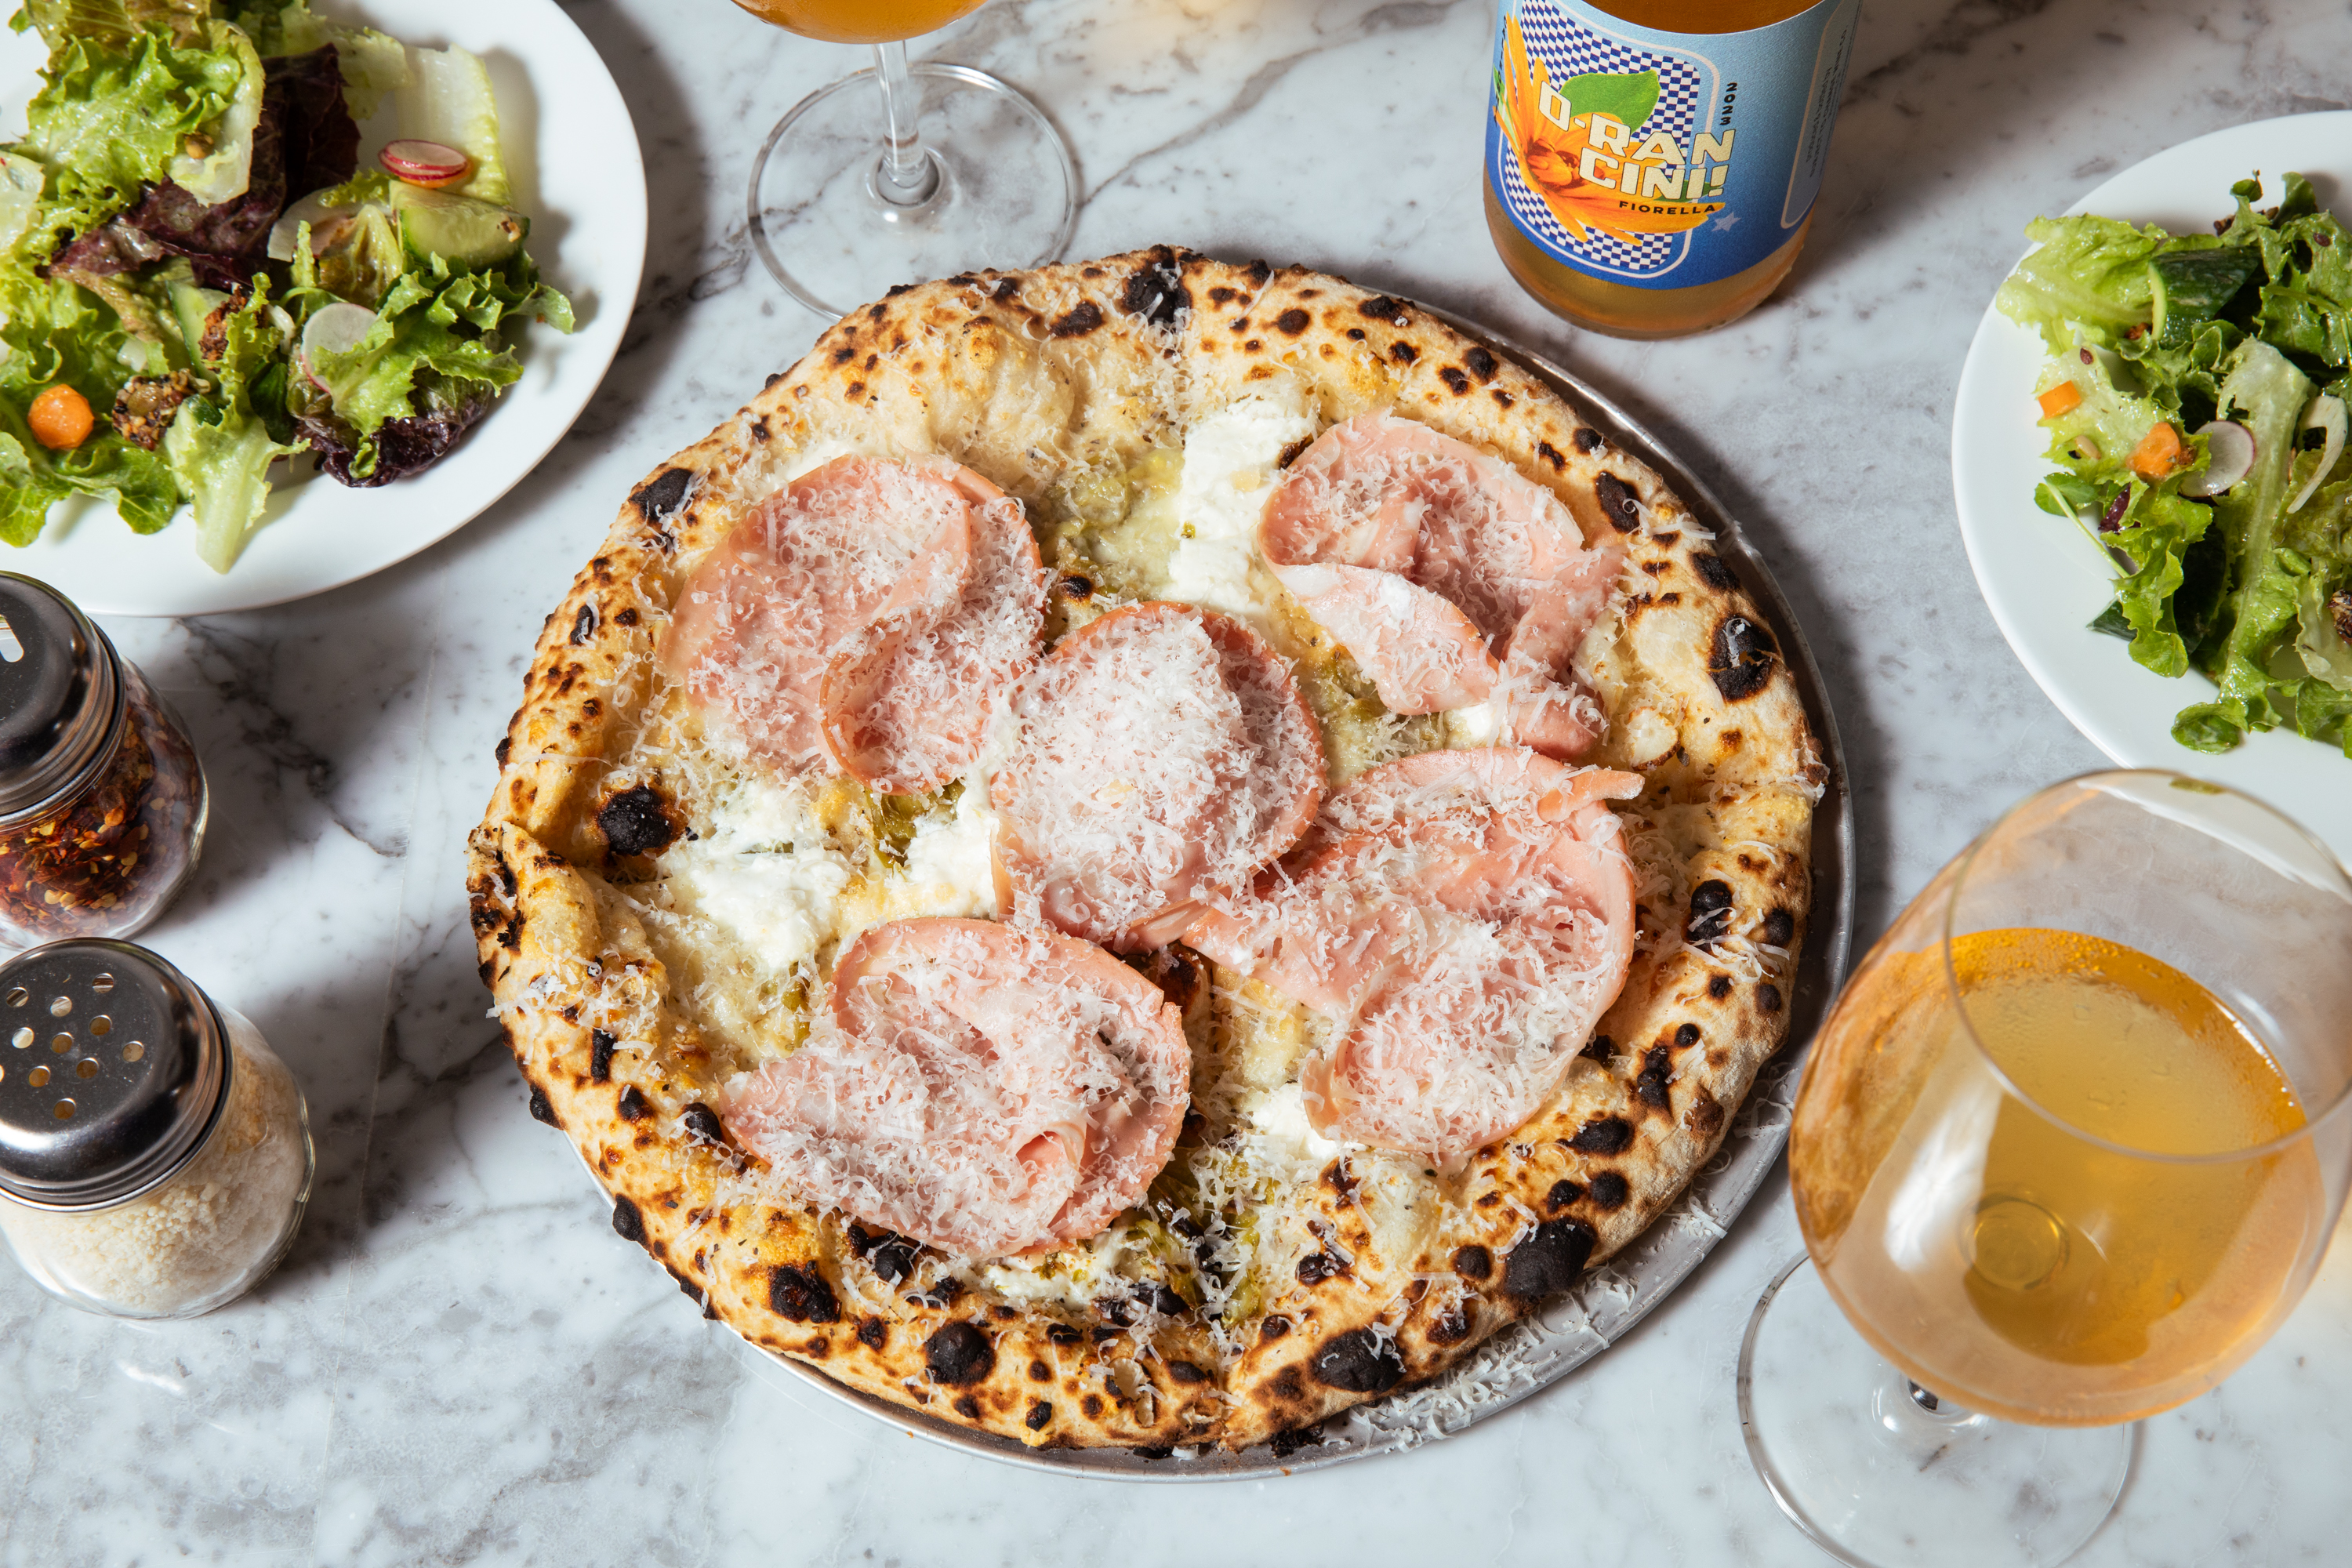 A pizza topped with cheese and slices of meat is on a marble table, accompanied by two plates of salad, a glass of beer, a beer bottle, and seasoning shakers.